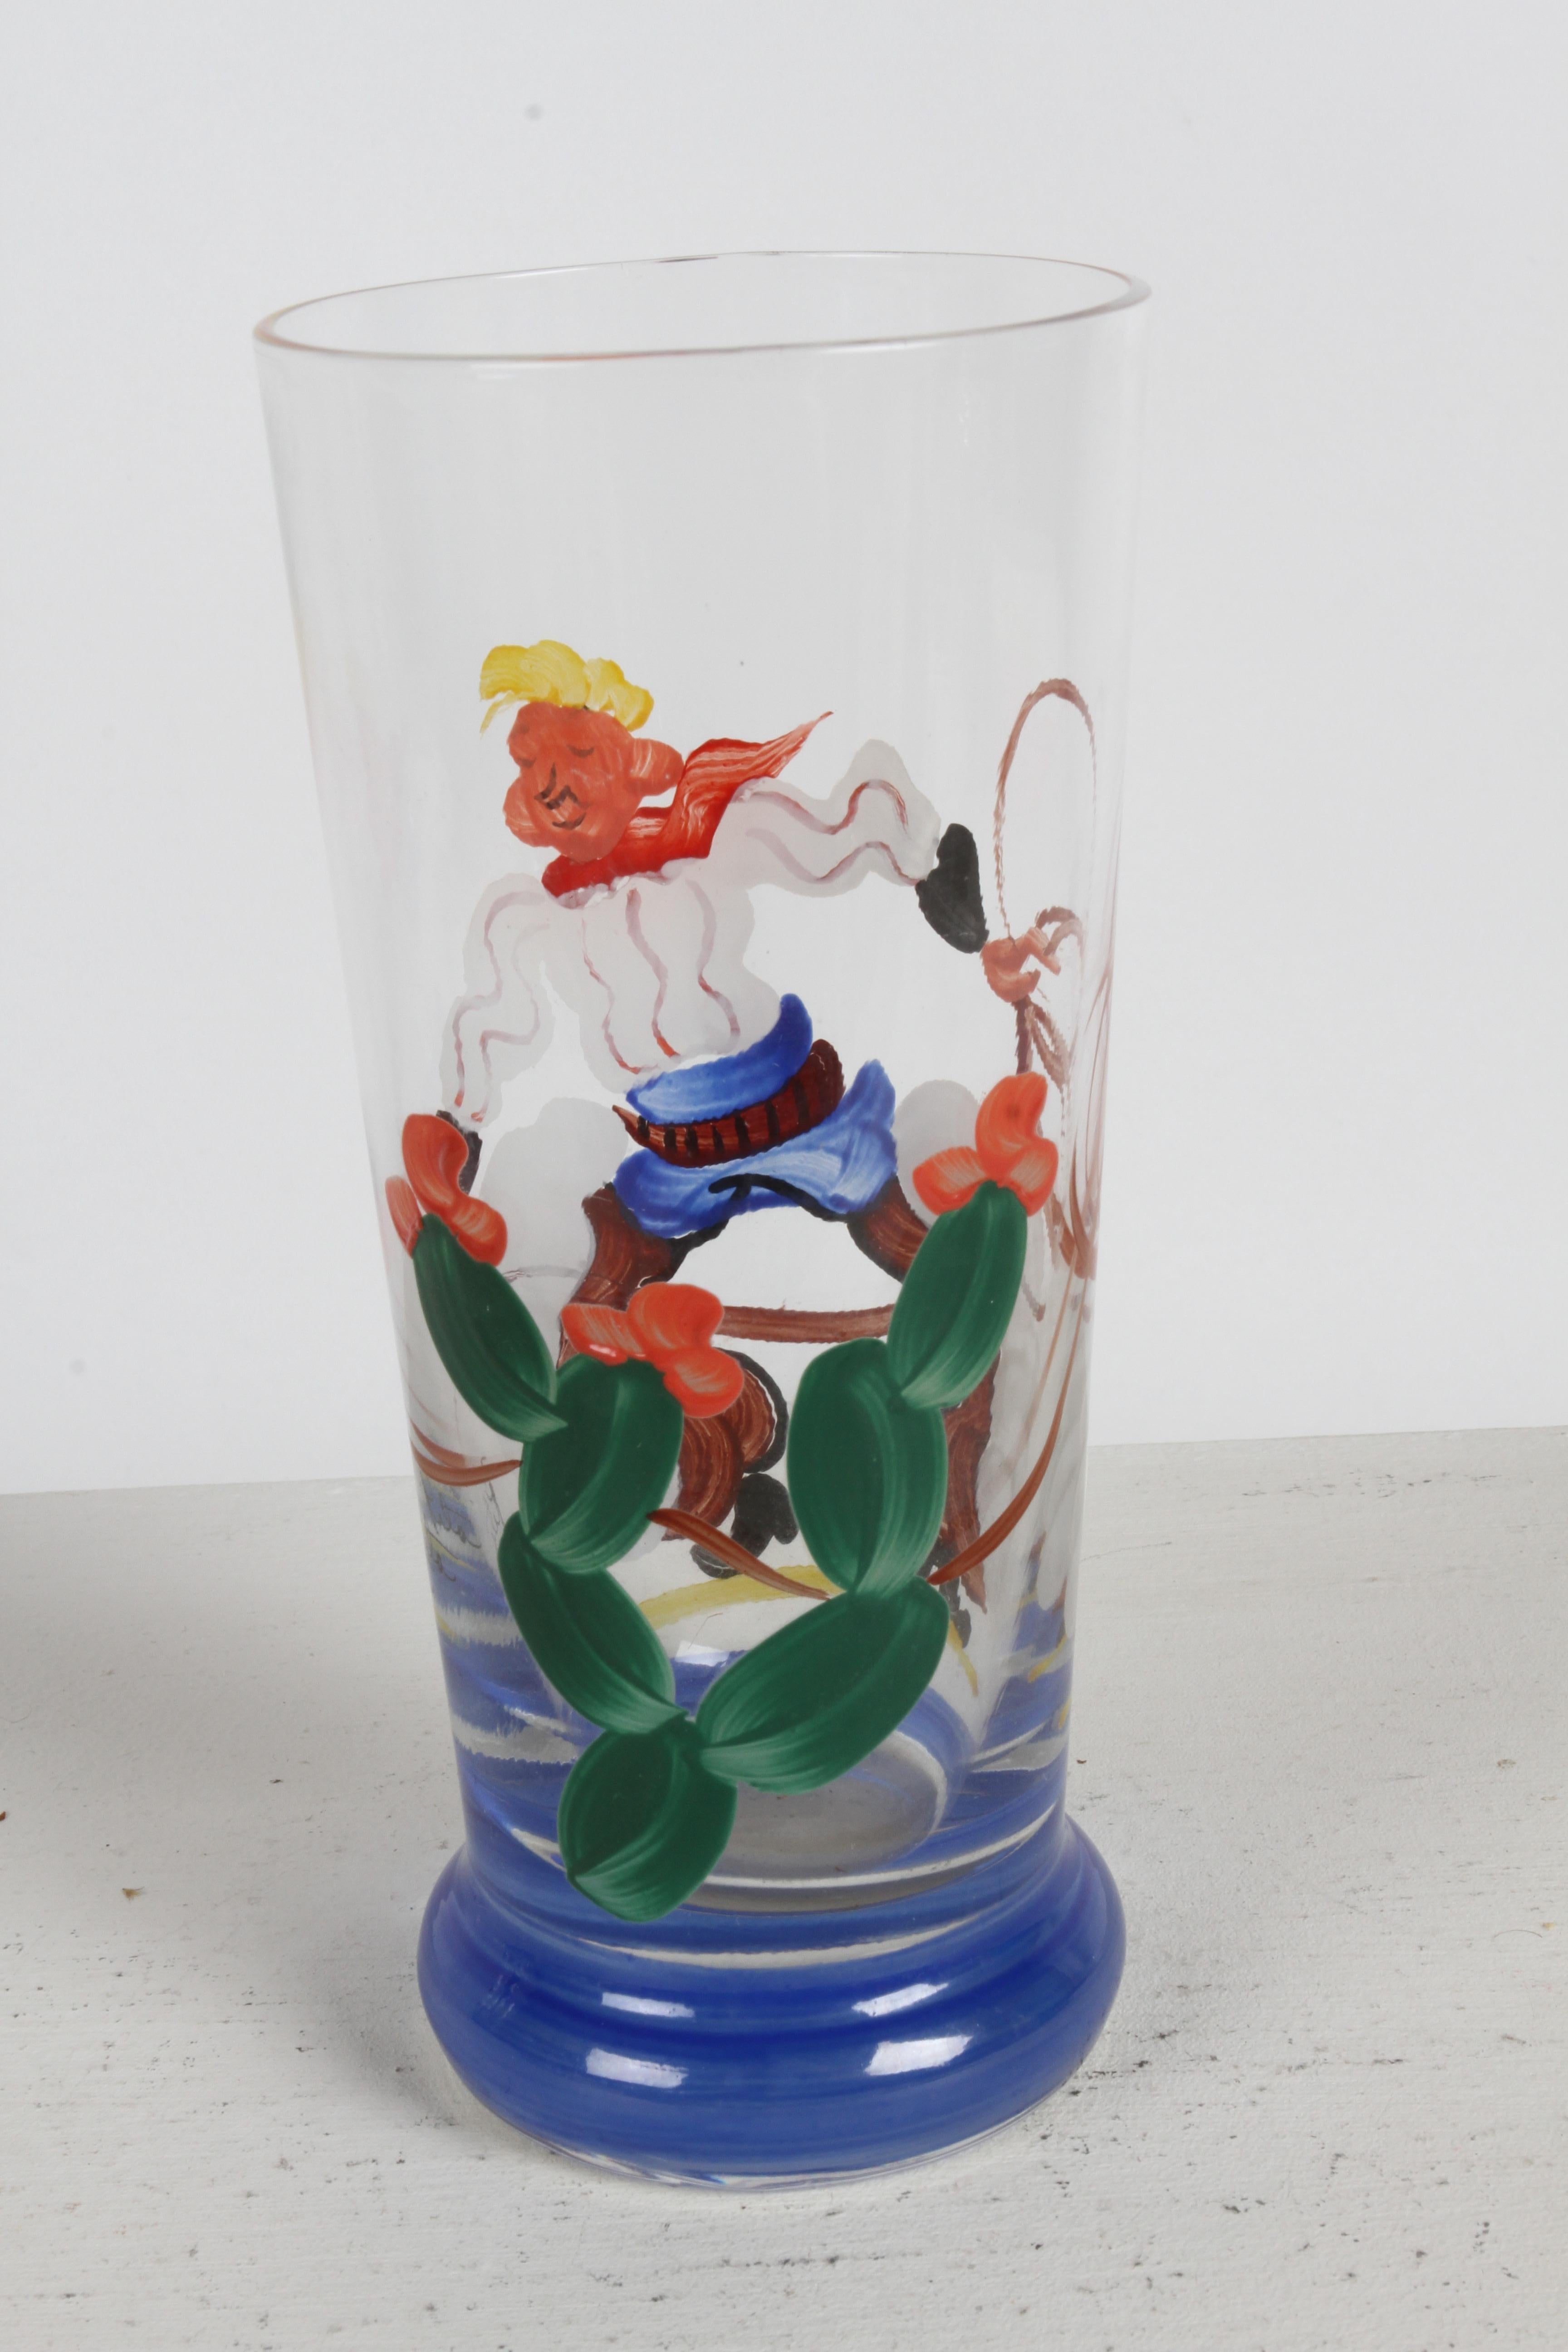 1940s Artist Hand-Painted Bar Glasses with Cowboy, Lasso & Cactus Theme - Rita  For Sale 3